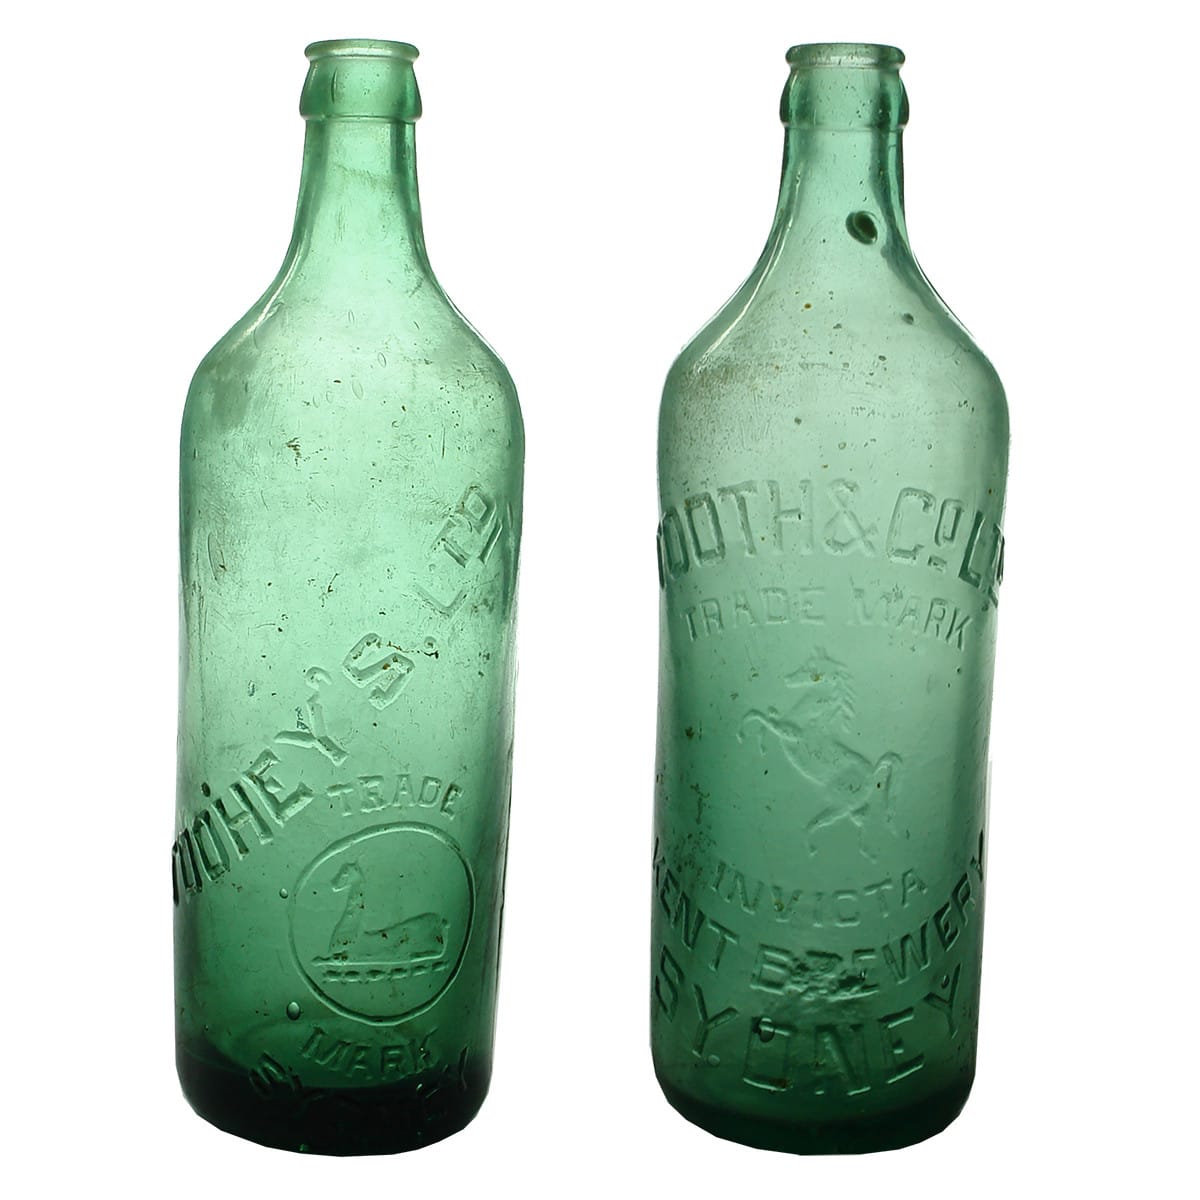 Two 24 oz Crown Seals: Tooheys & Tooth & Co, Sydney. Ross Bros Green. (New South Wales)